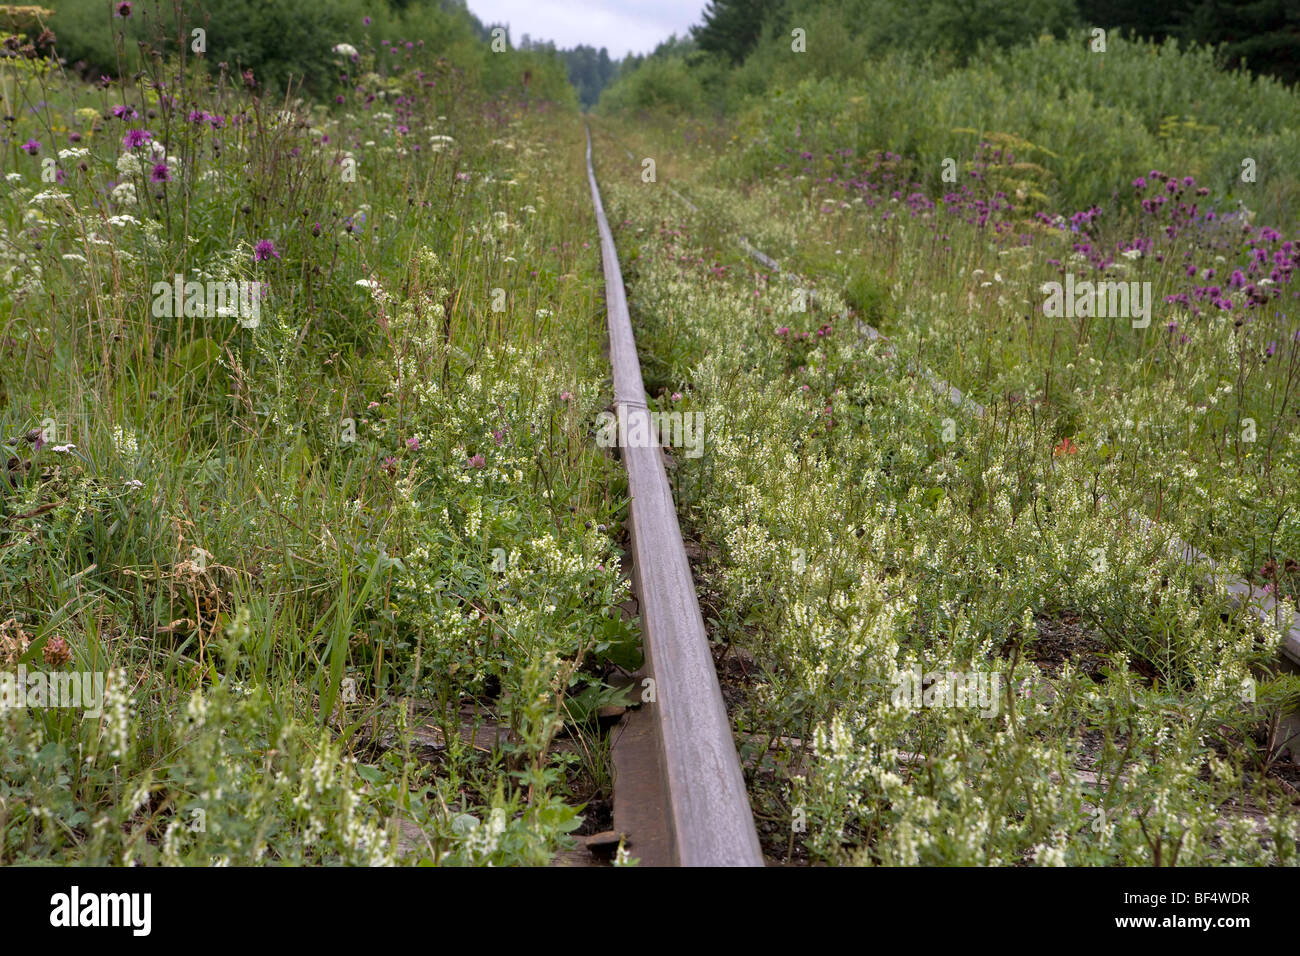 Rail track hidden by overgrown grass, Russia Stock Photo